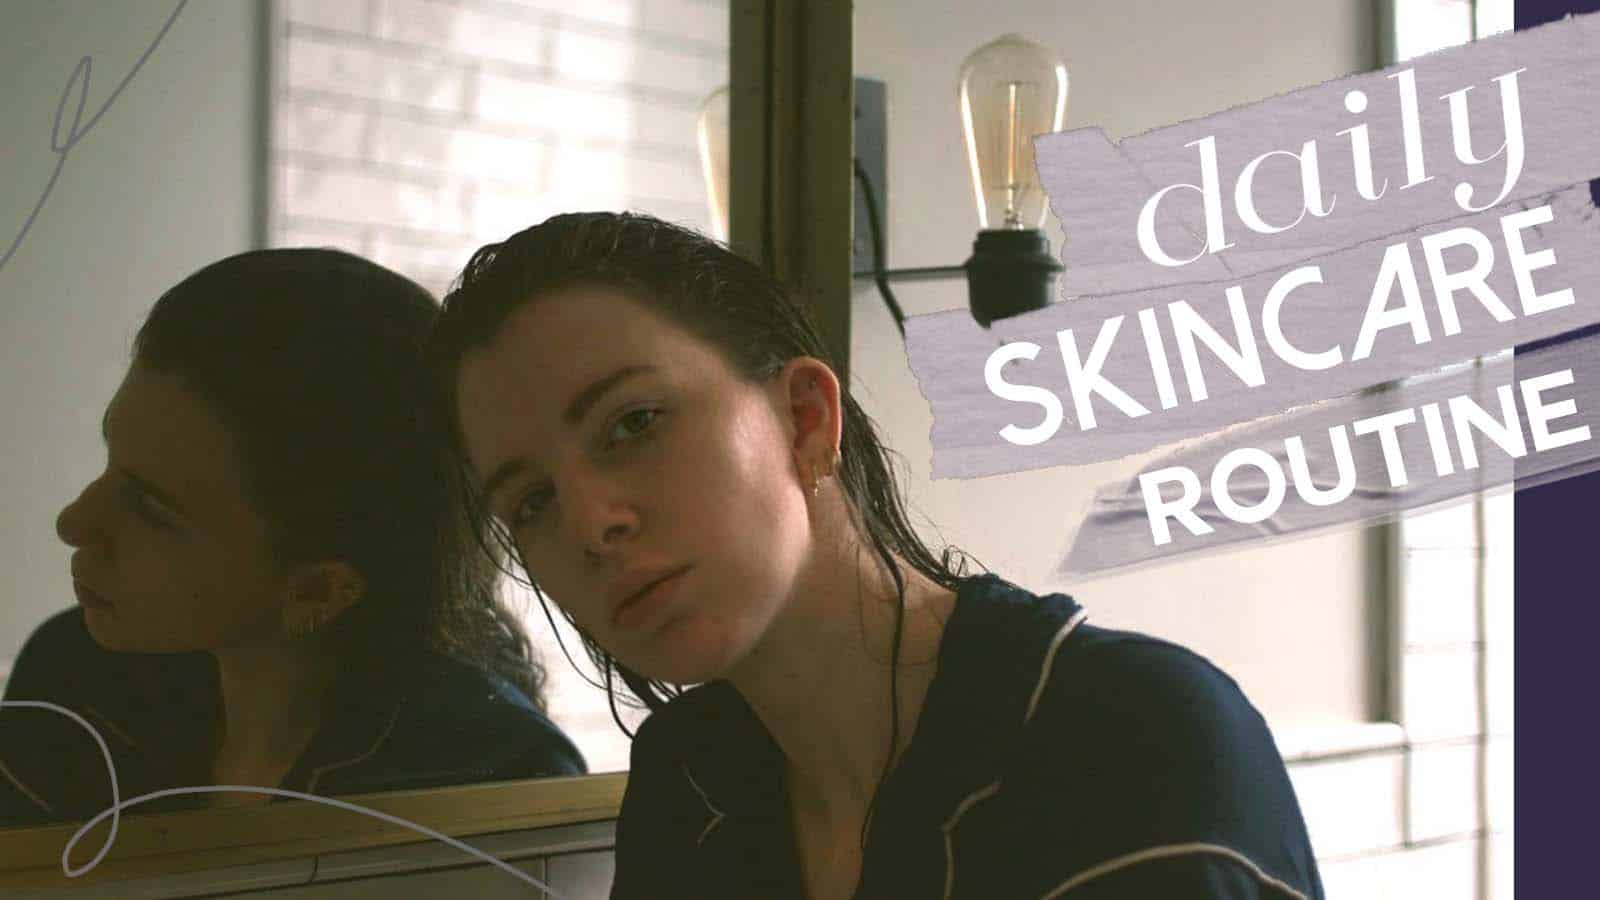 Daily Skincare Routine Steps: Glowing Skin is Attainable